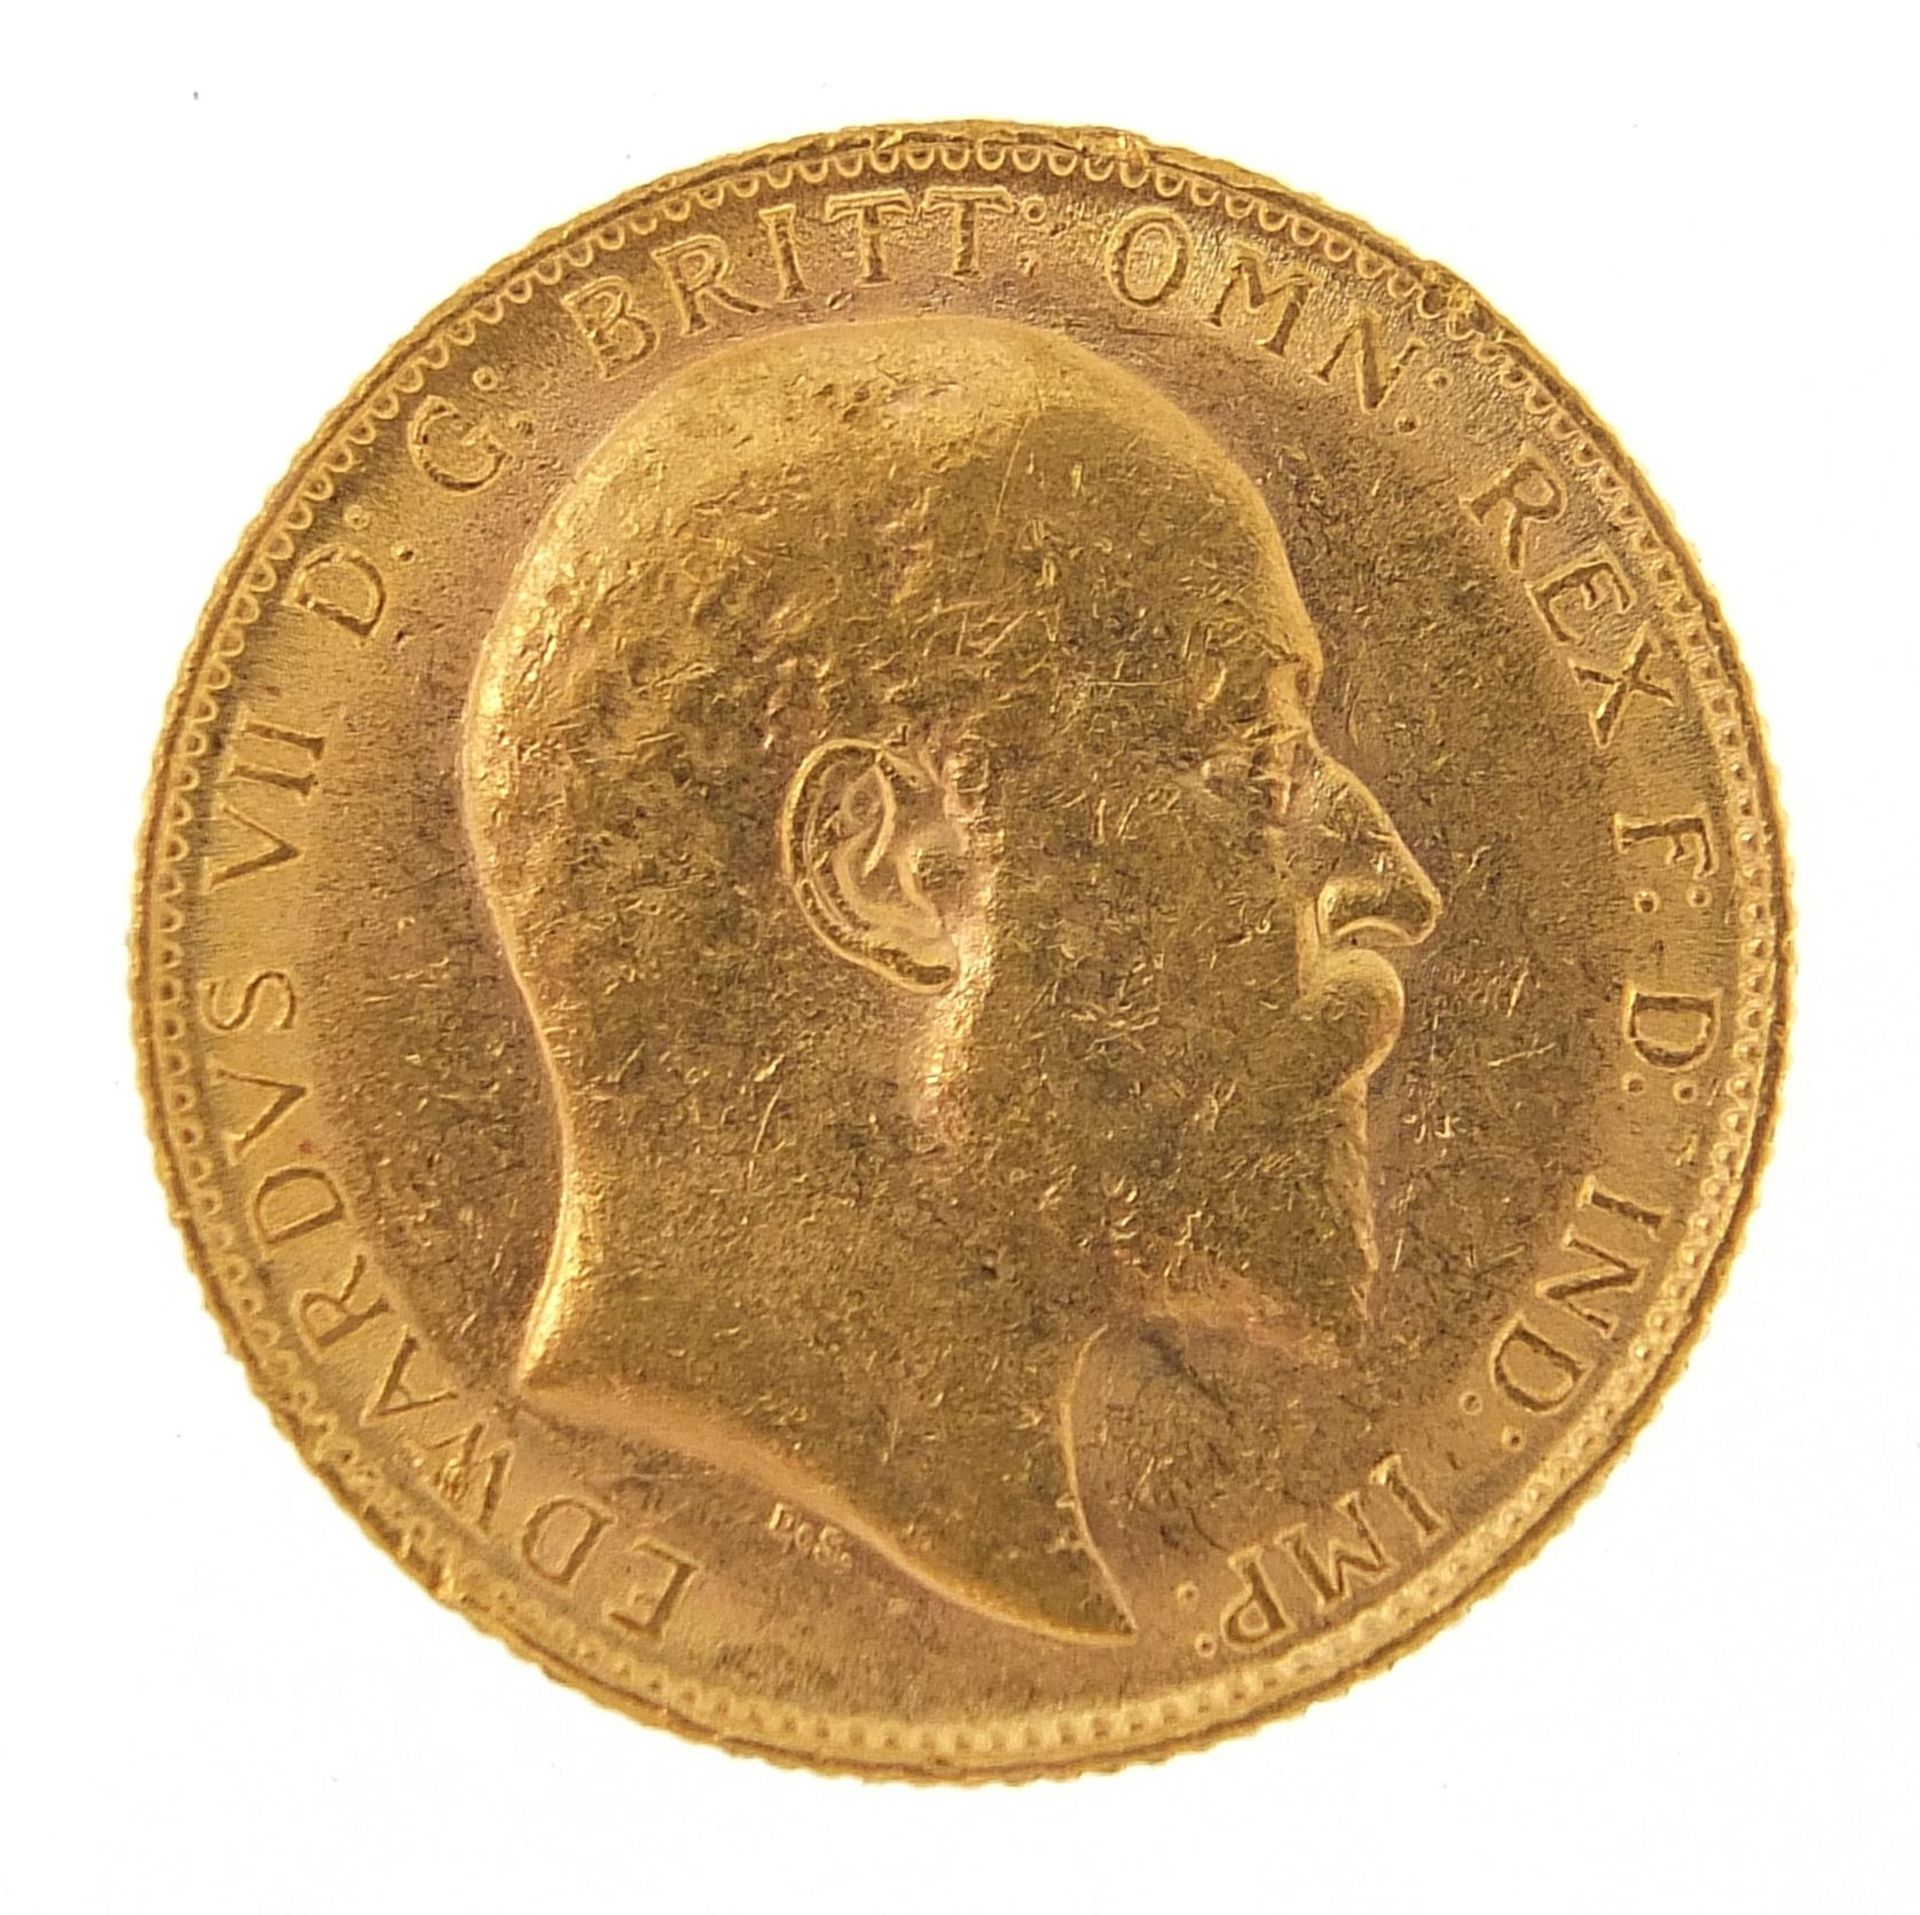 Edward VII 1909 gold sovereign - this lot is sold without buyer's premium - Image 2 of 3